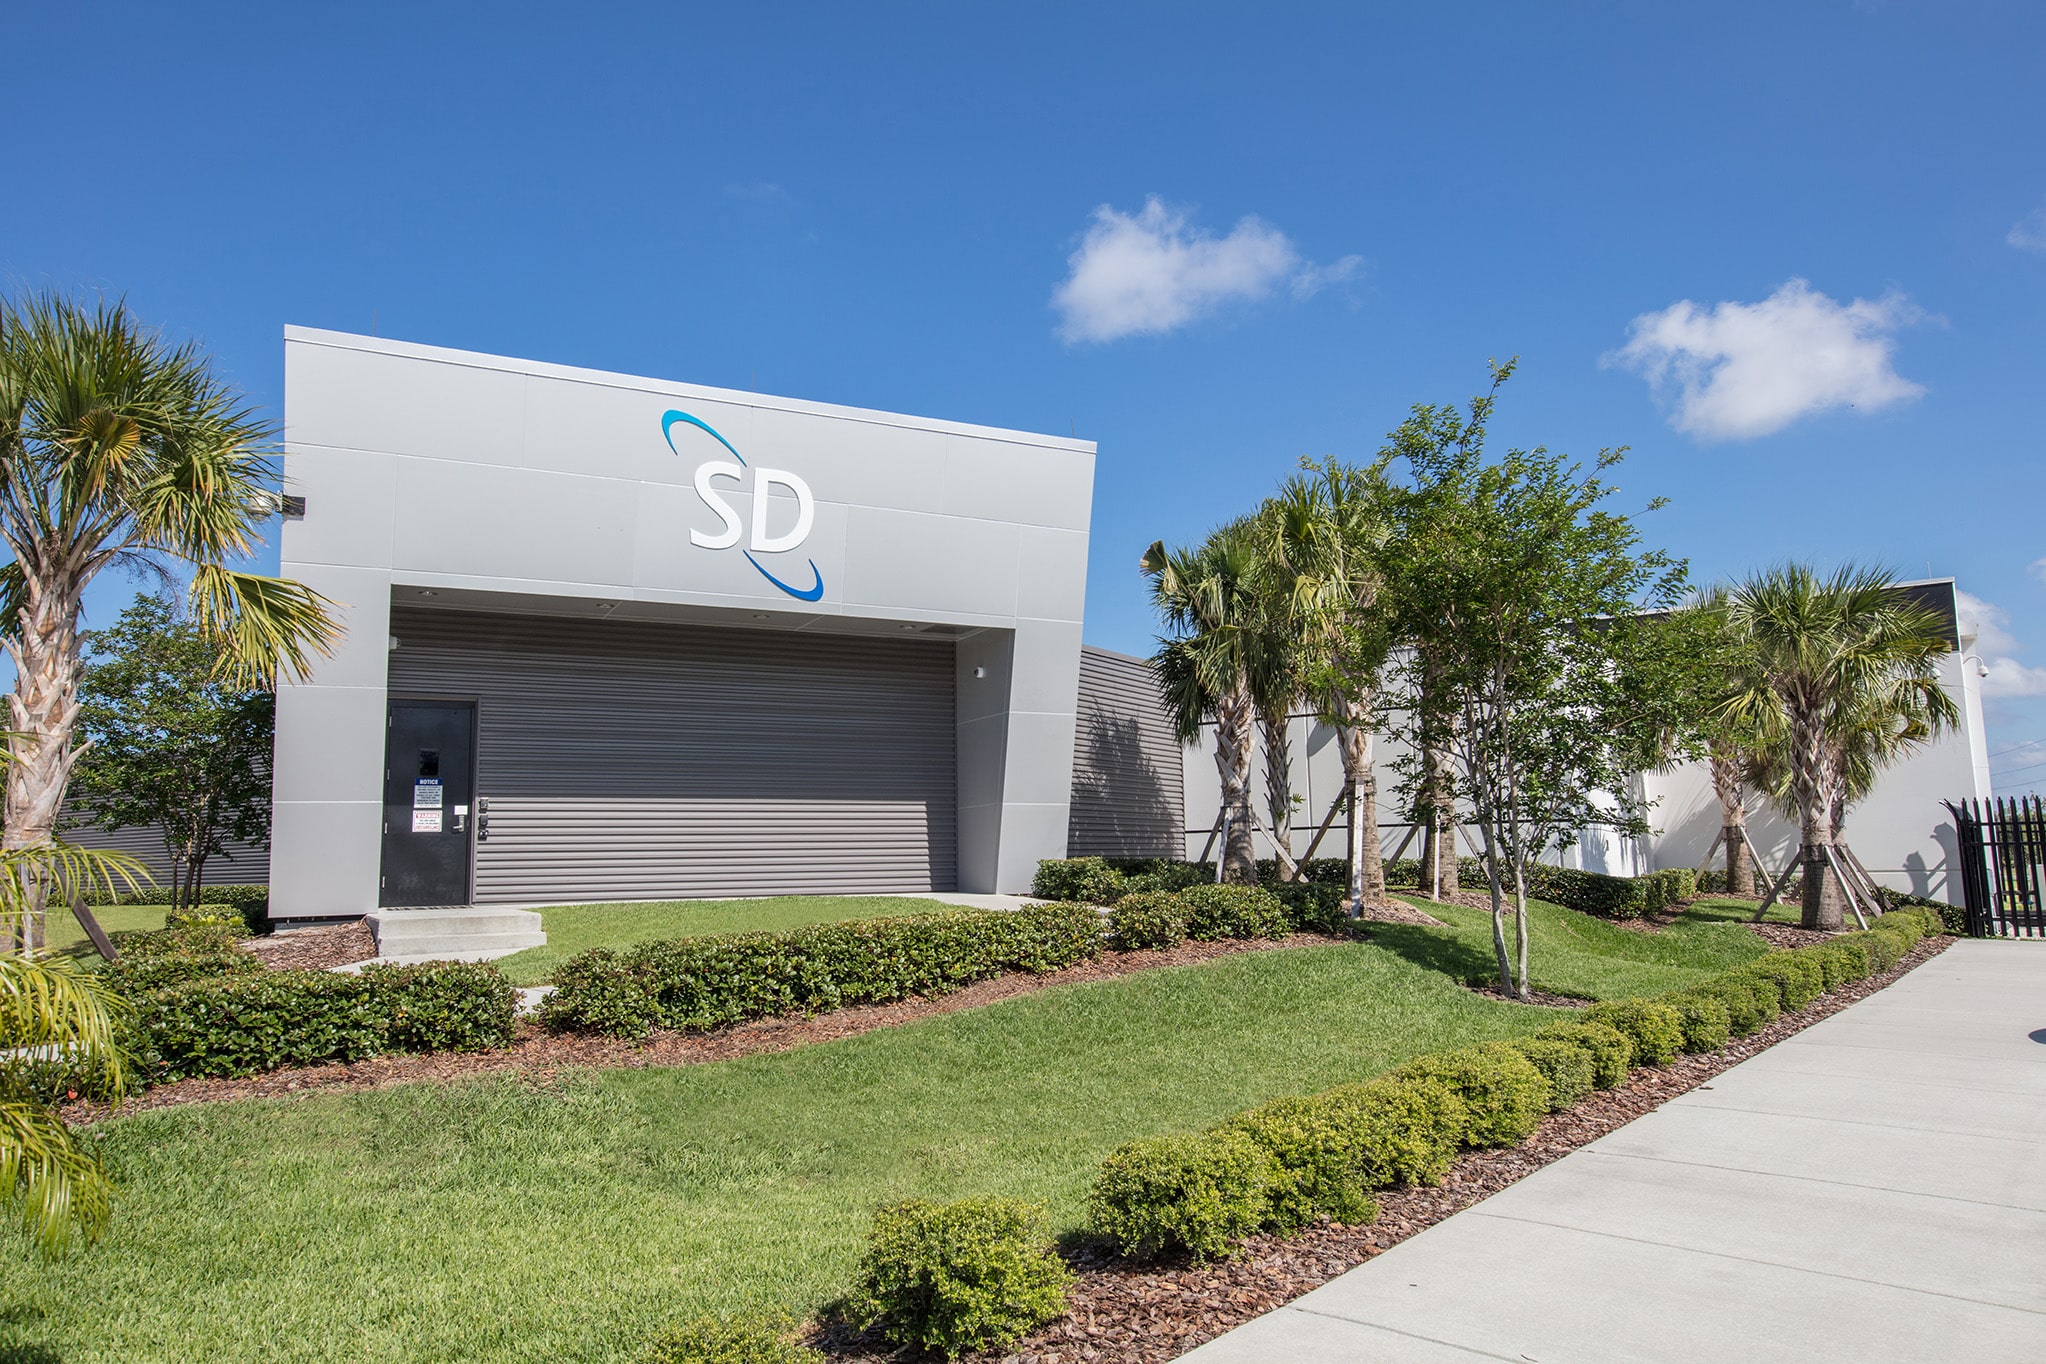 SD Data Center facility front view.